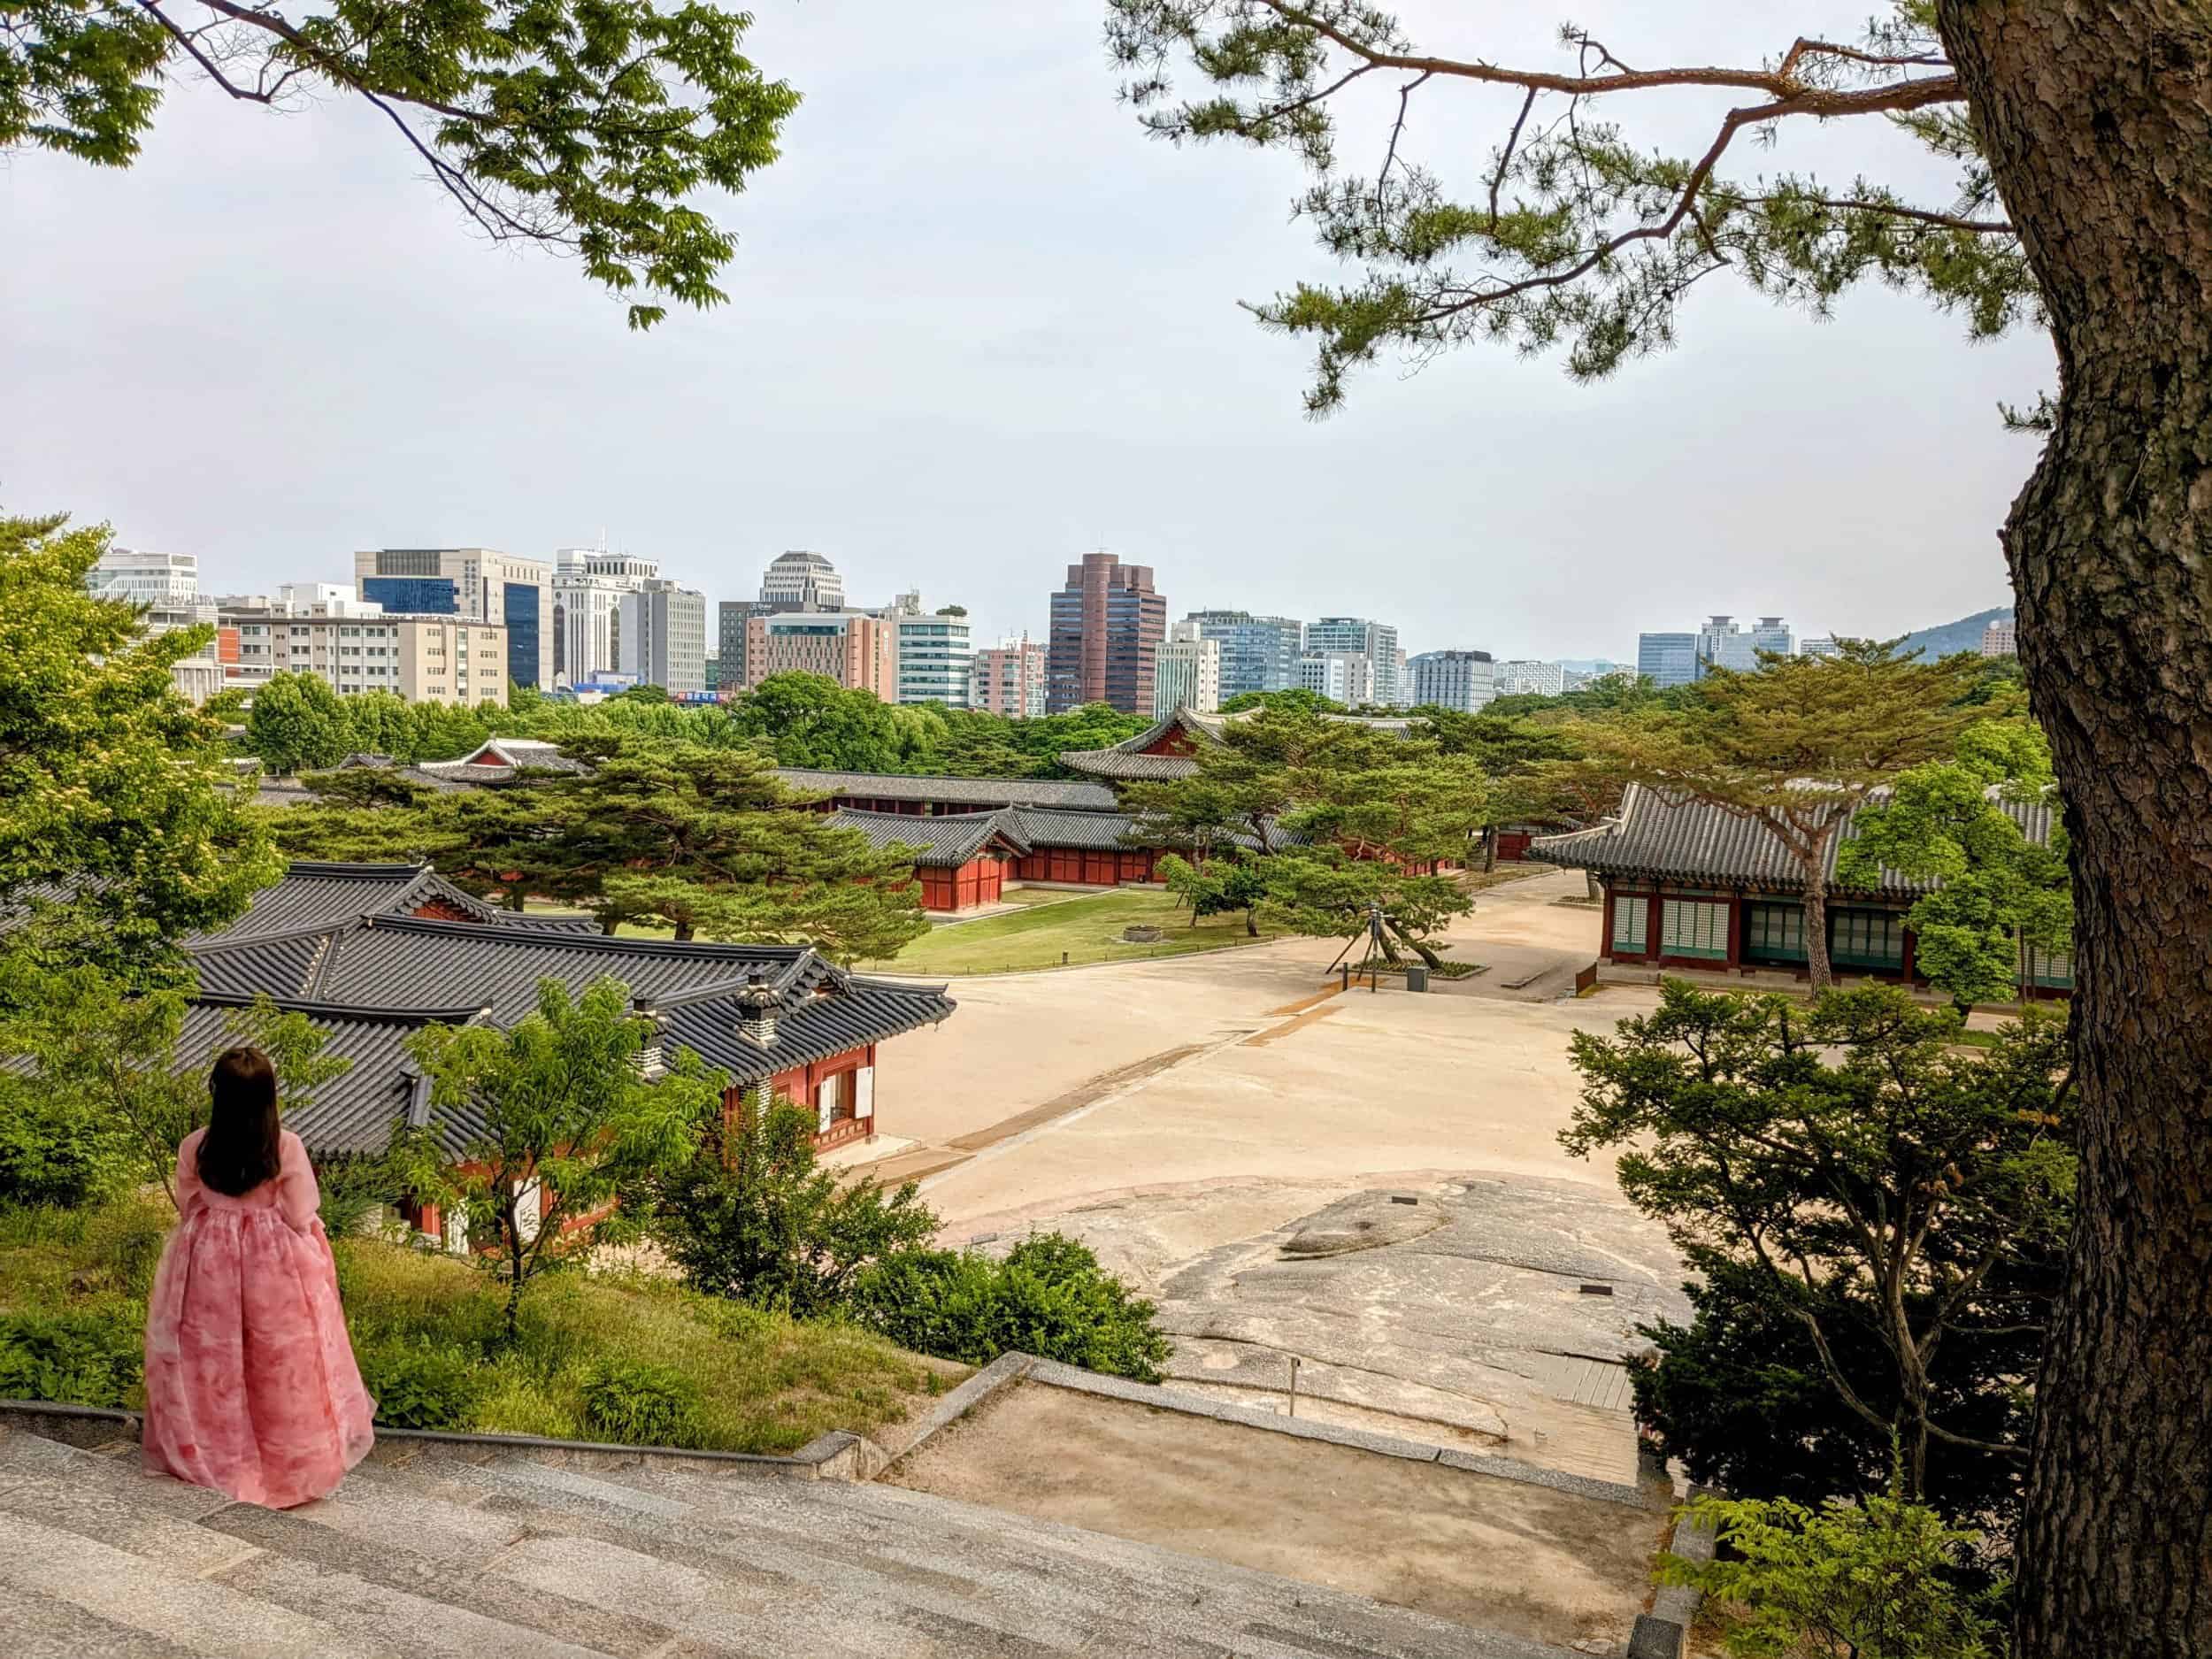 Woman in traditional hanbok dress standing on steps looking out towards buildings of Changgyeonggung Palace, with Seoul cityscape in background